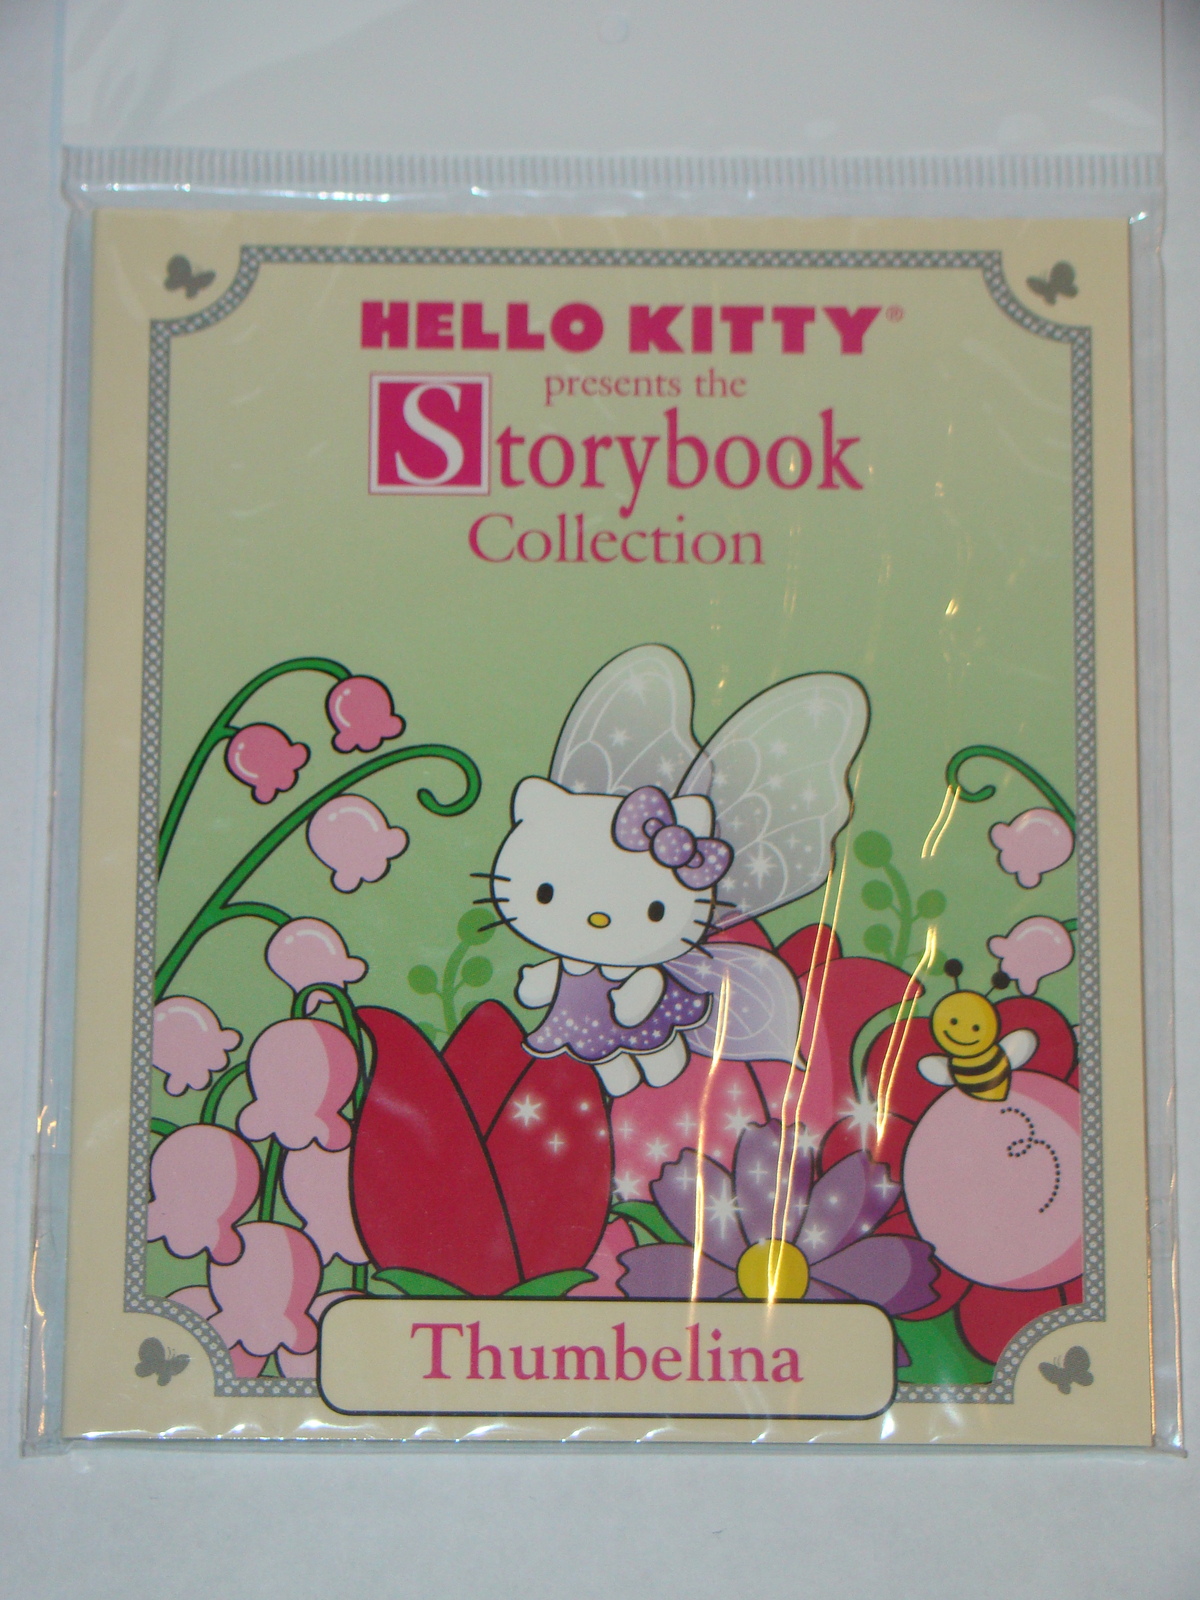 Primary image for HELLO KITTY presents the Storybook Collection - Thumbelina